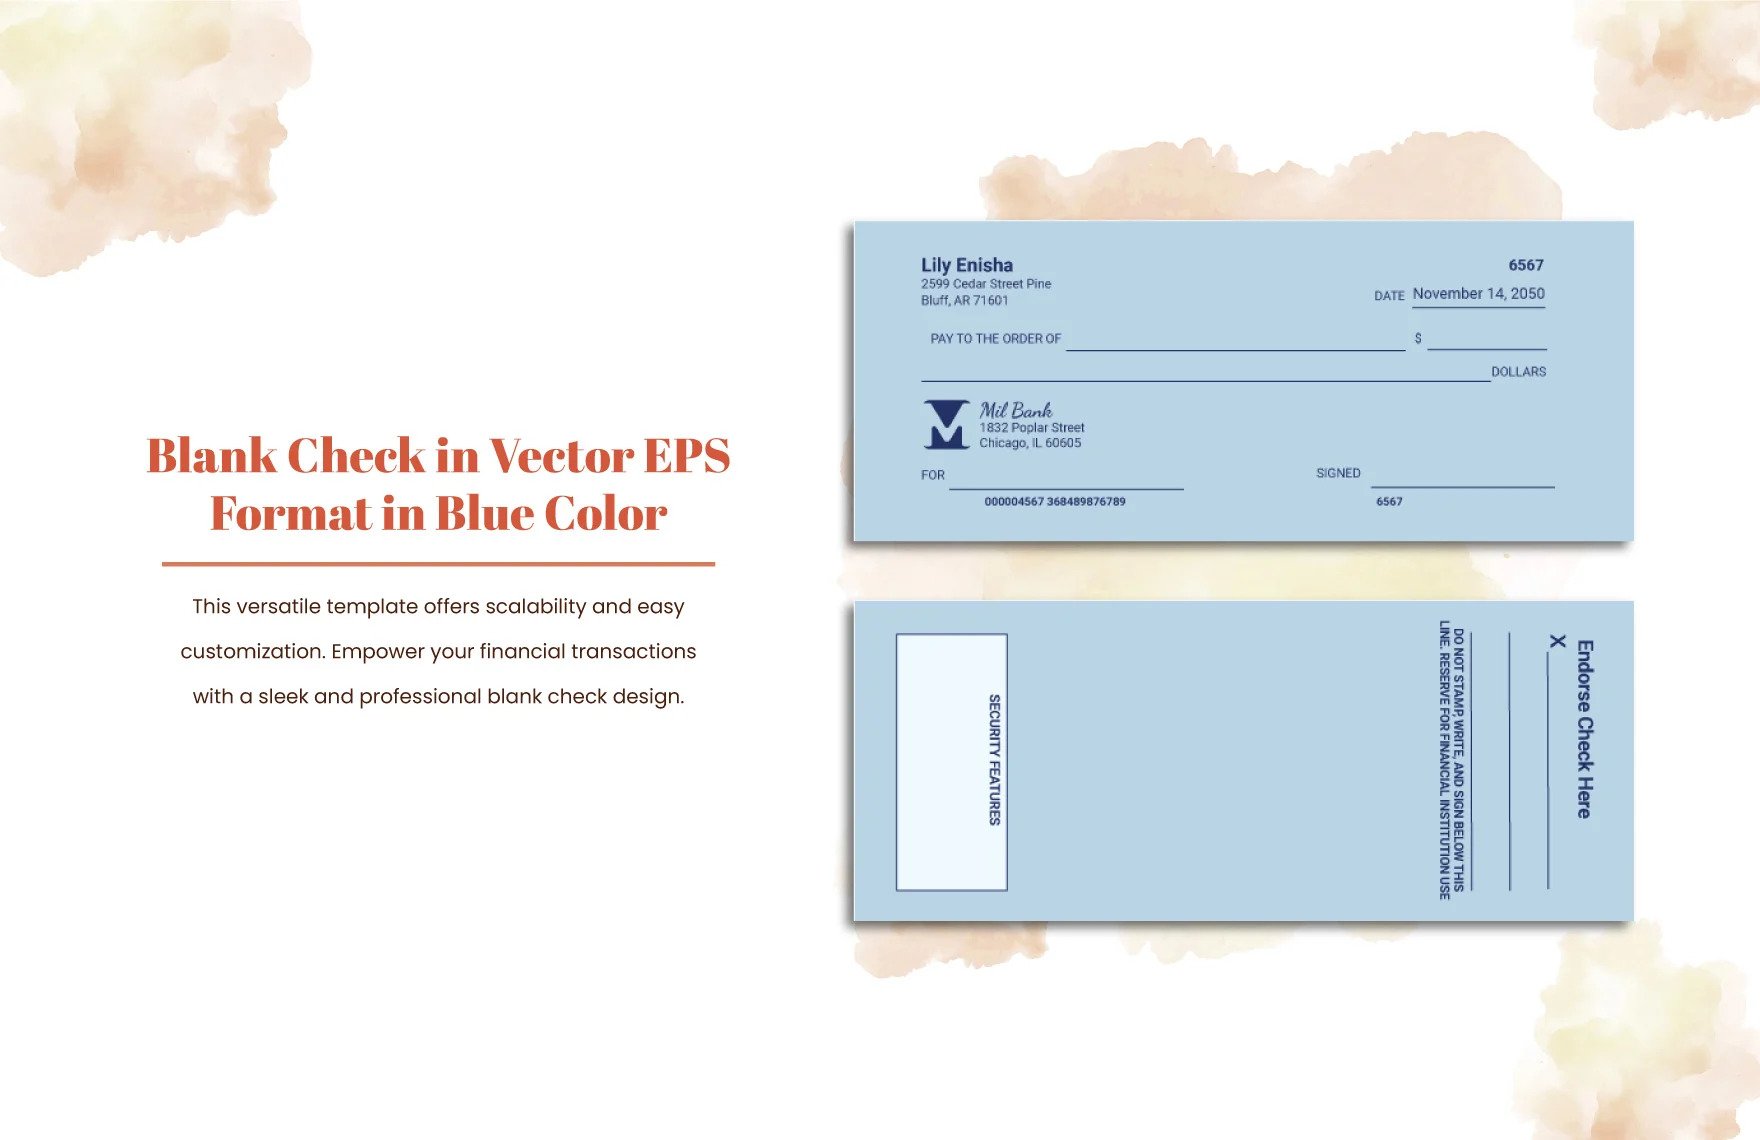 blank check in vector eps format in blue color